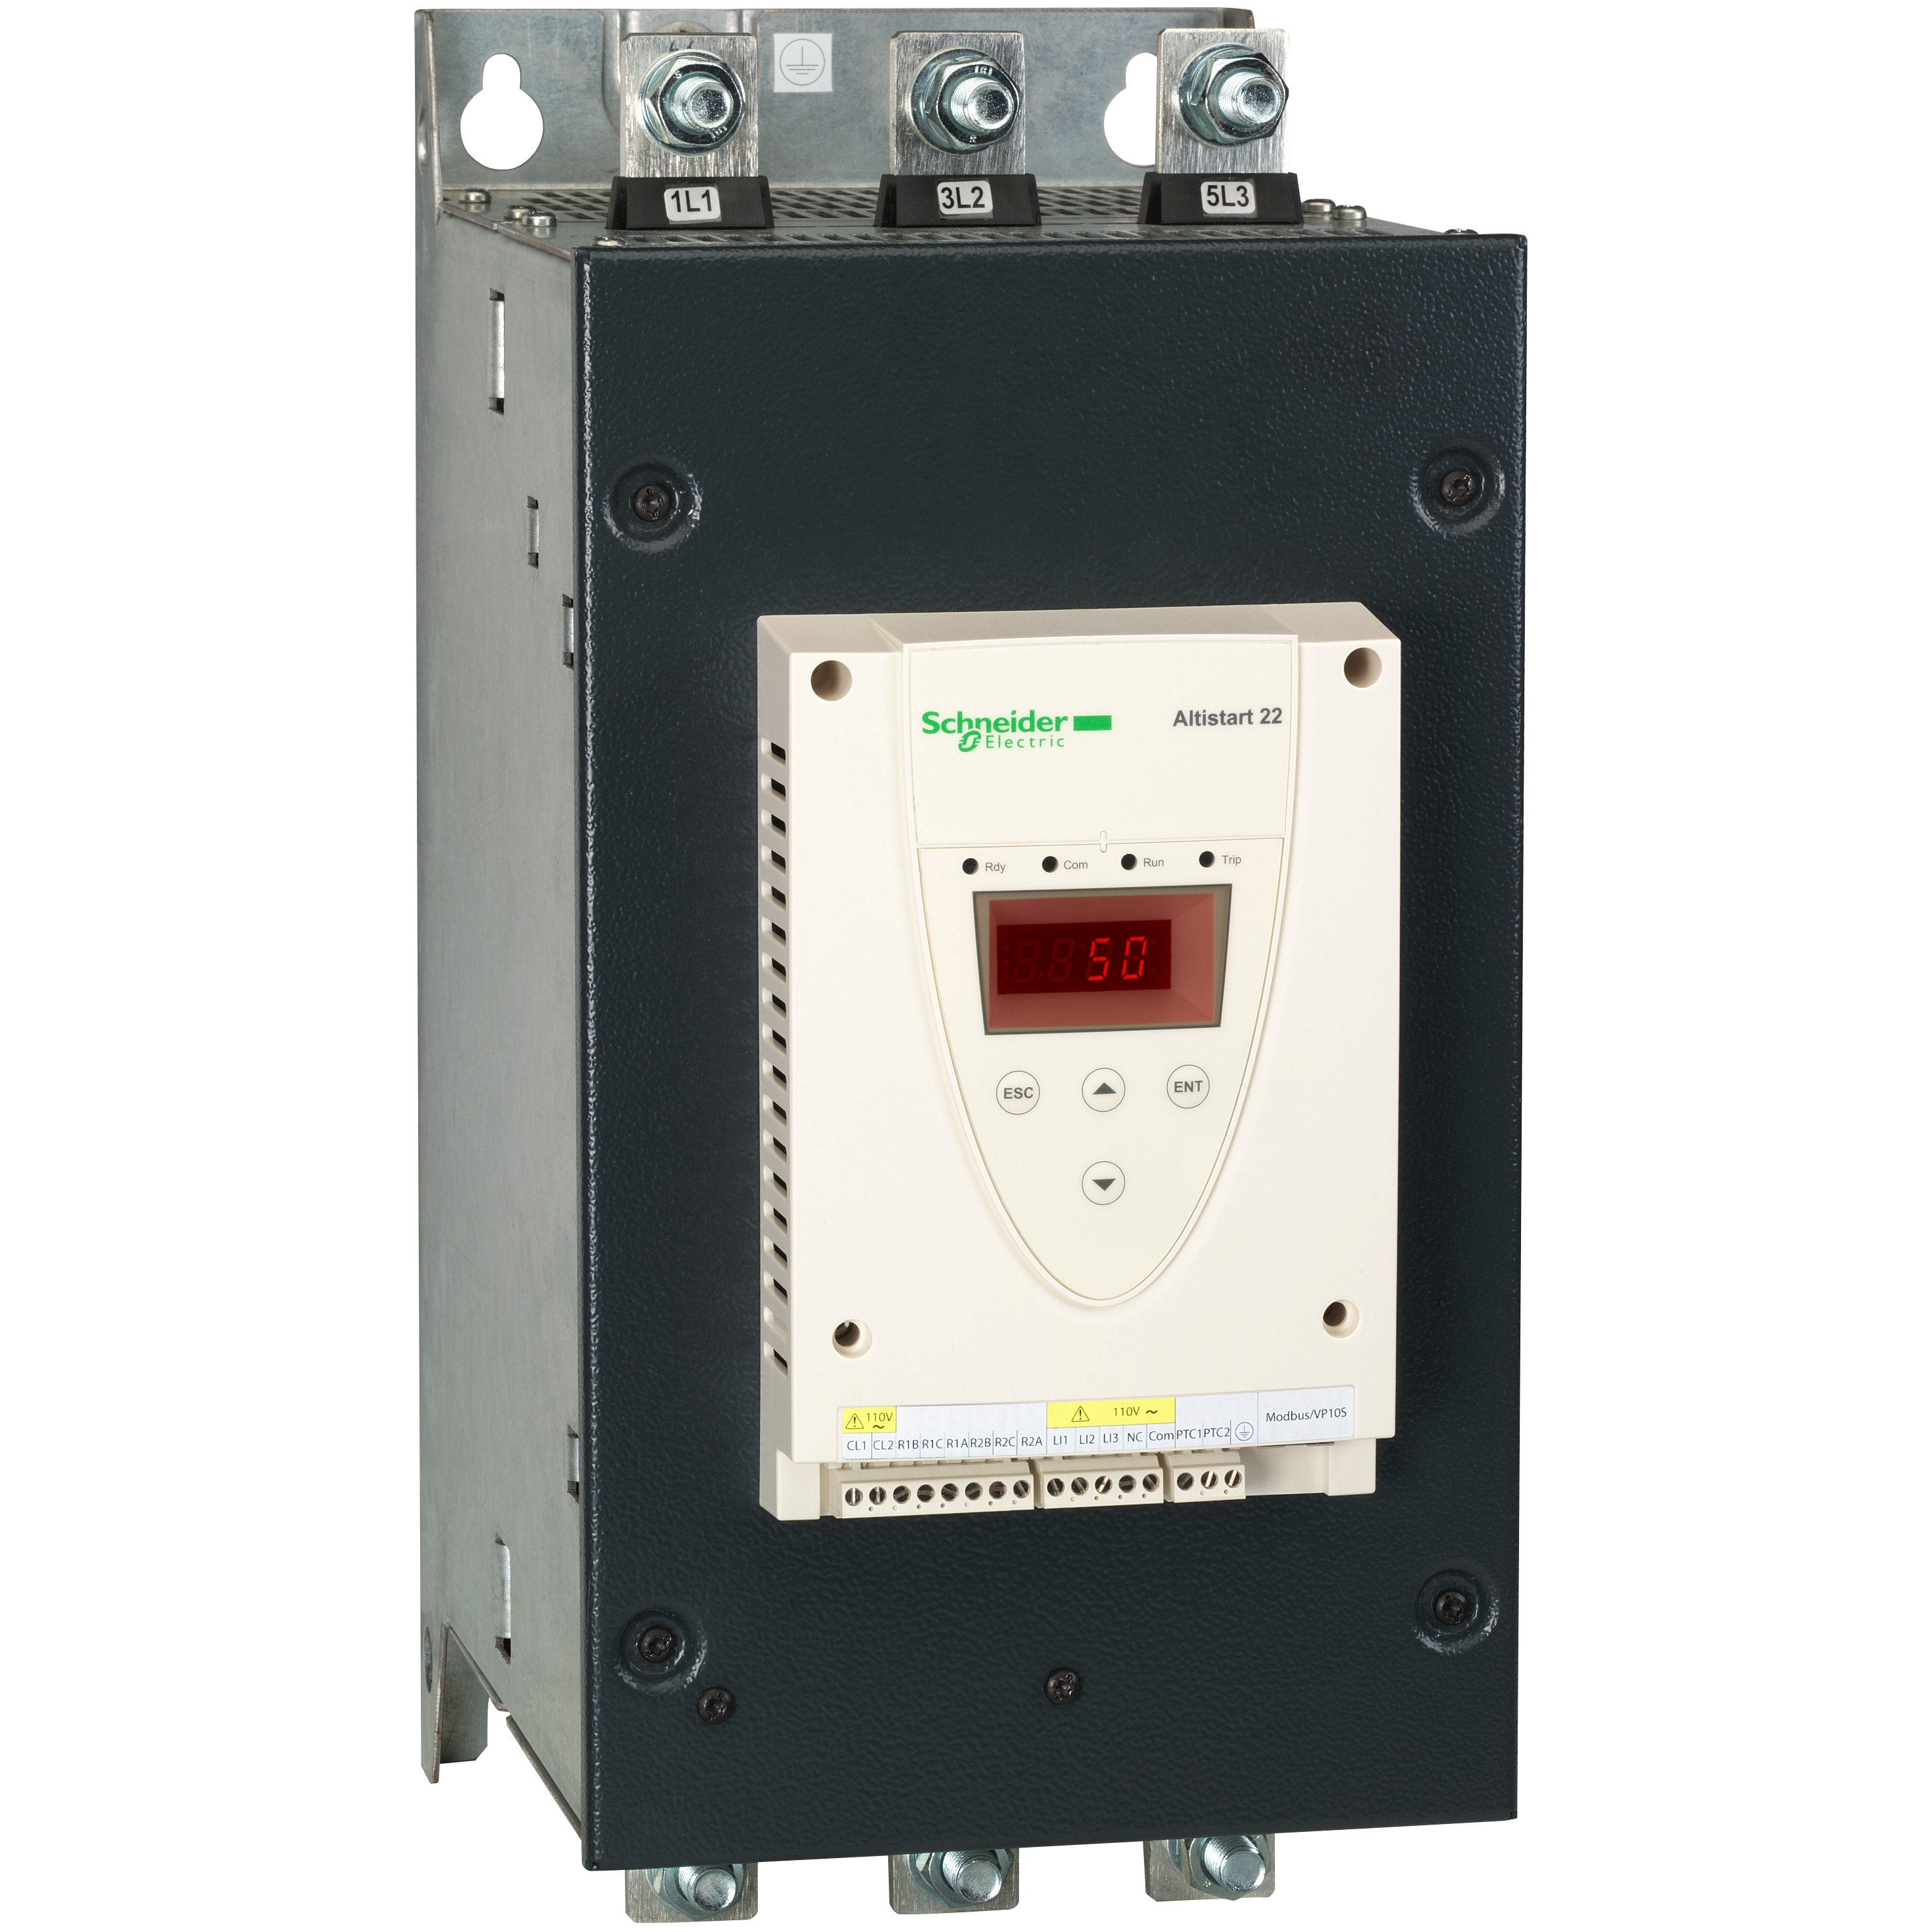 Soft start/soft stop, P=220kW, Uc=400V AC, In=410A